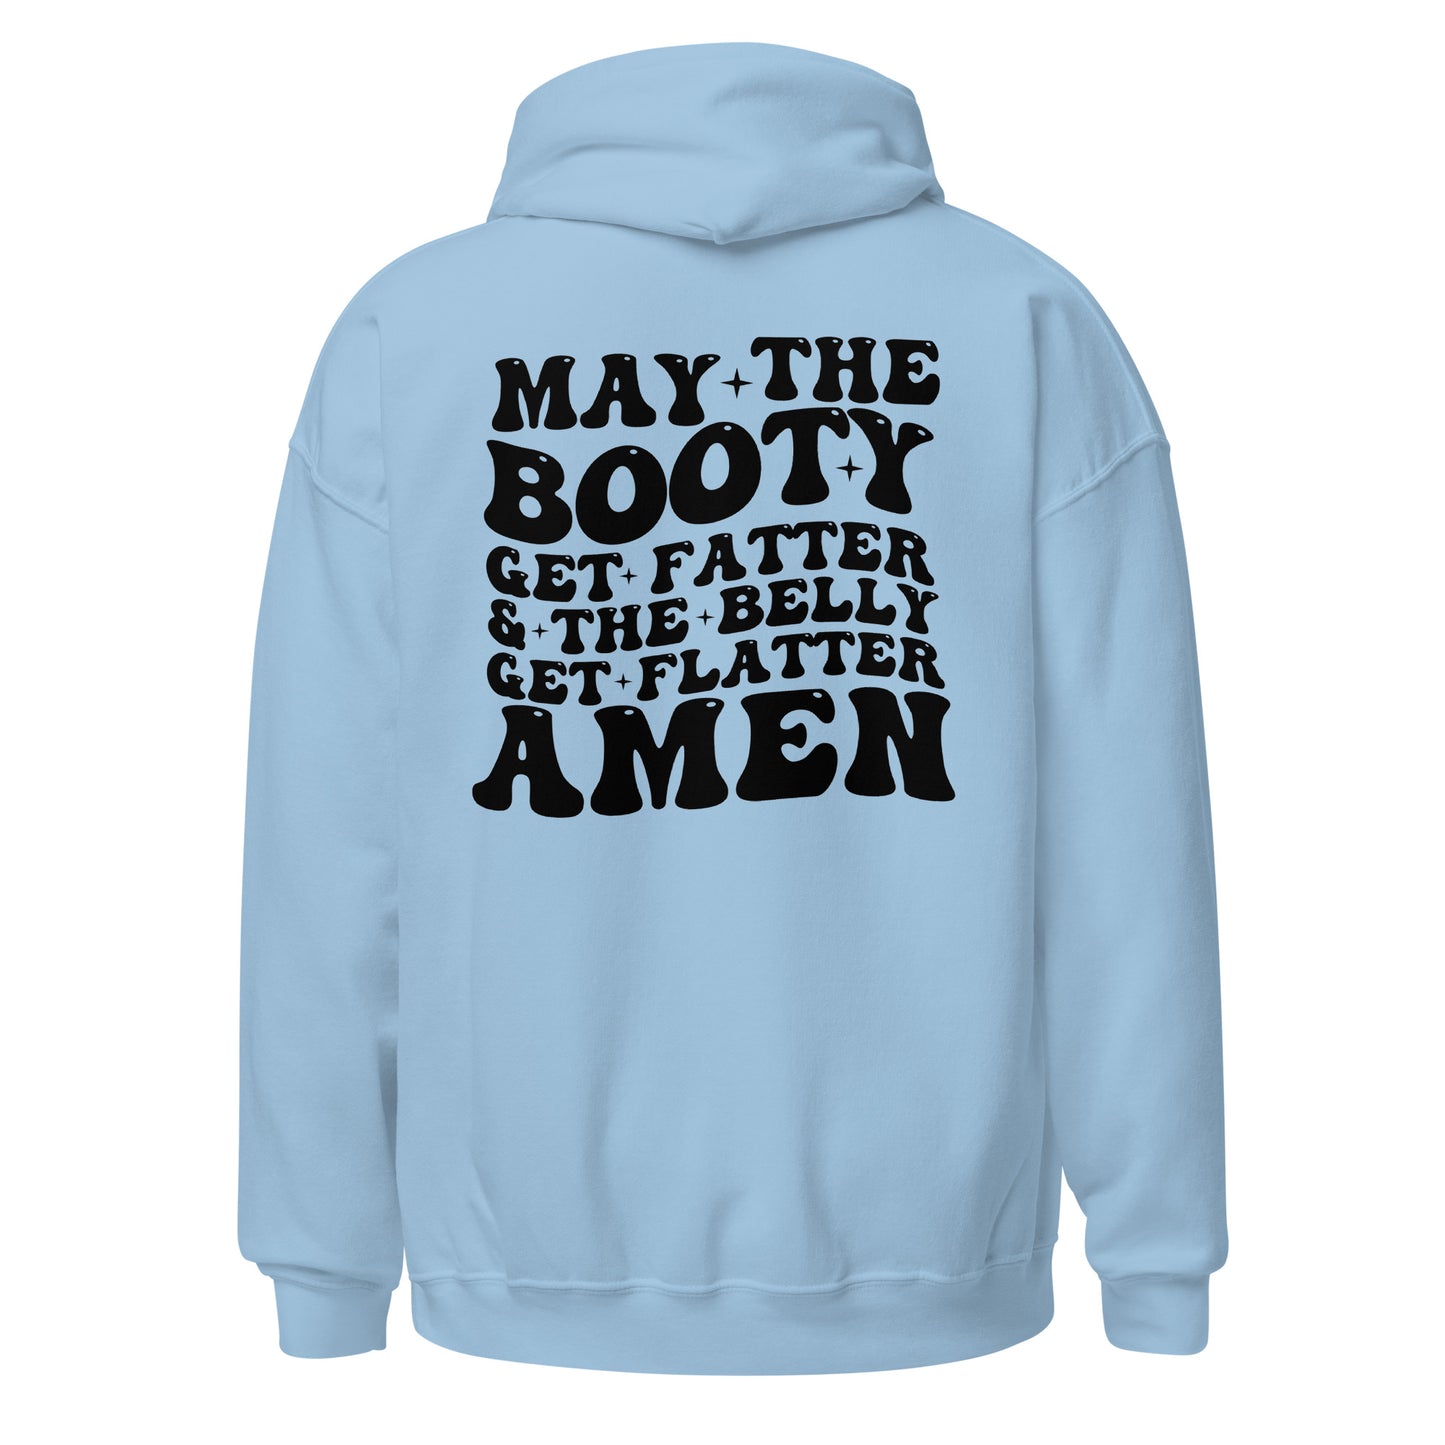 May The Booty Get Fatter Hoodie